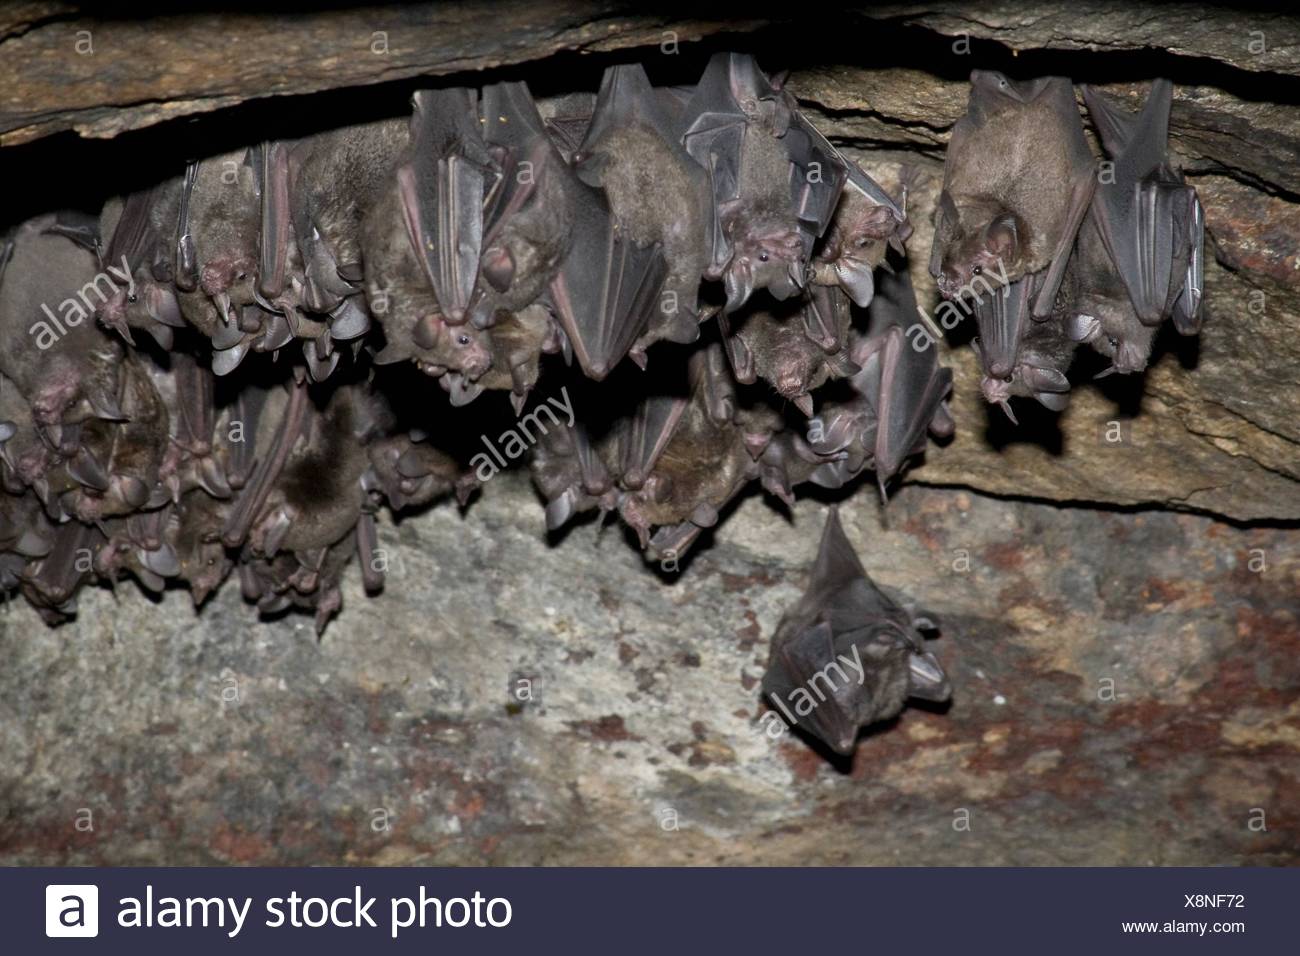 A Colony Of Bats Clinging To A Cave Ceiling Photographed In Costa